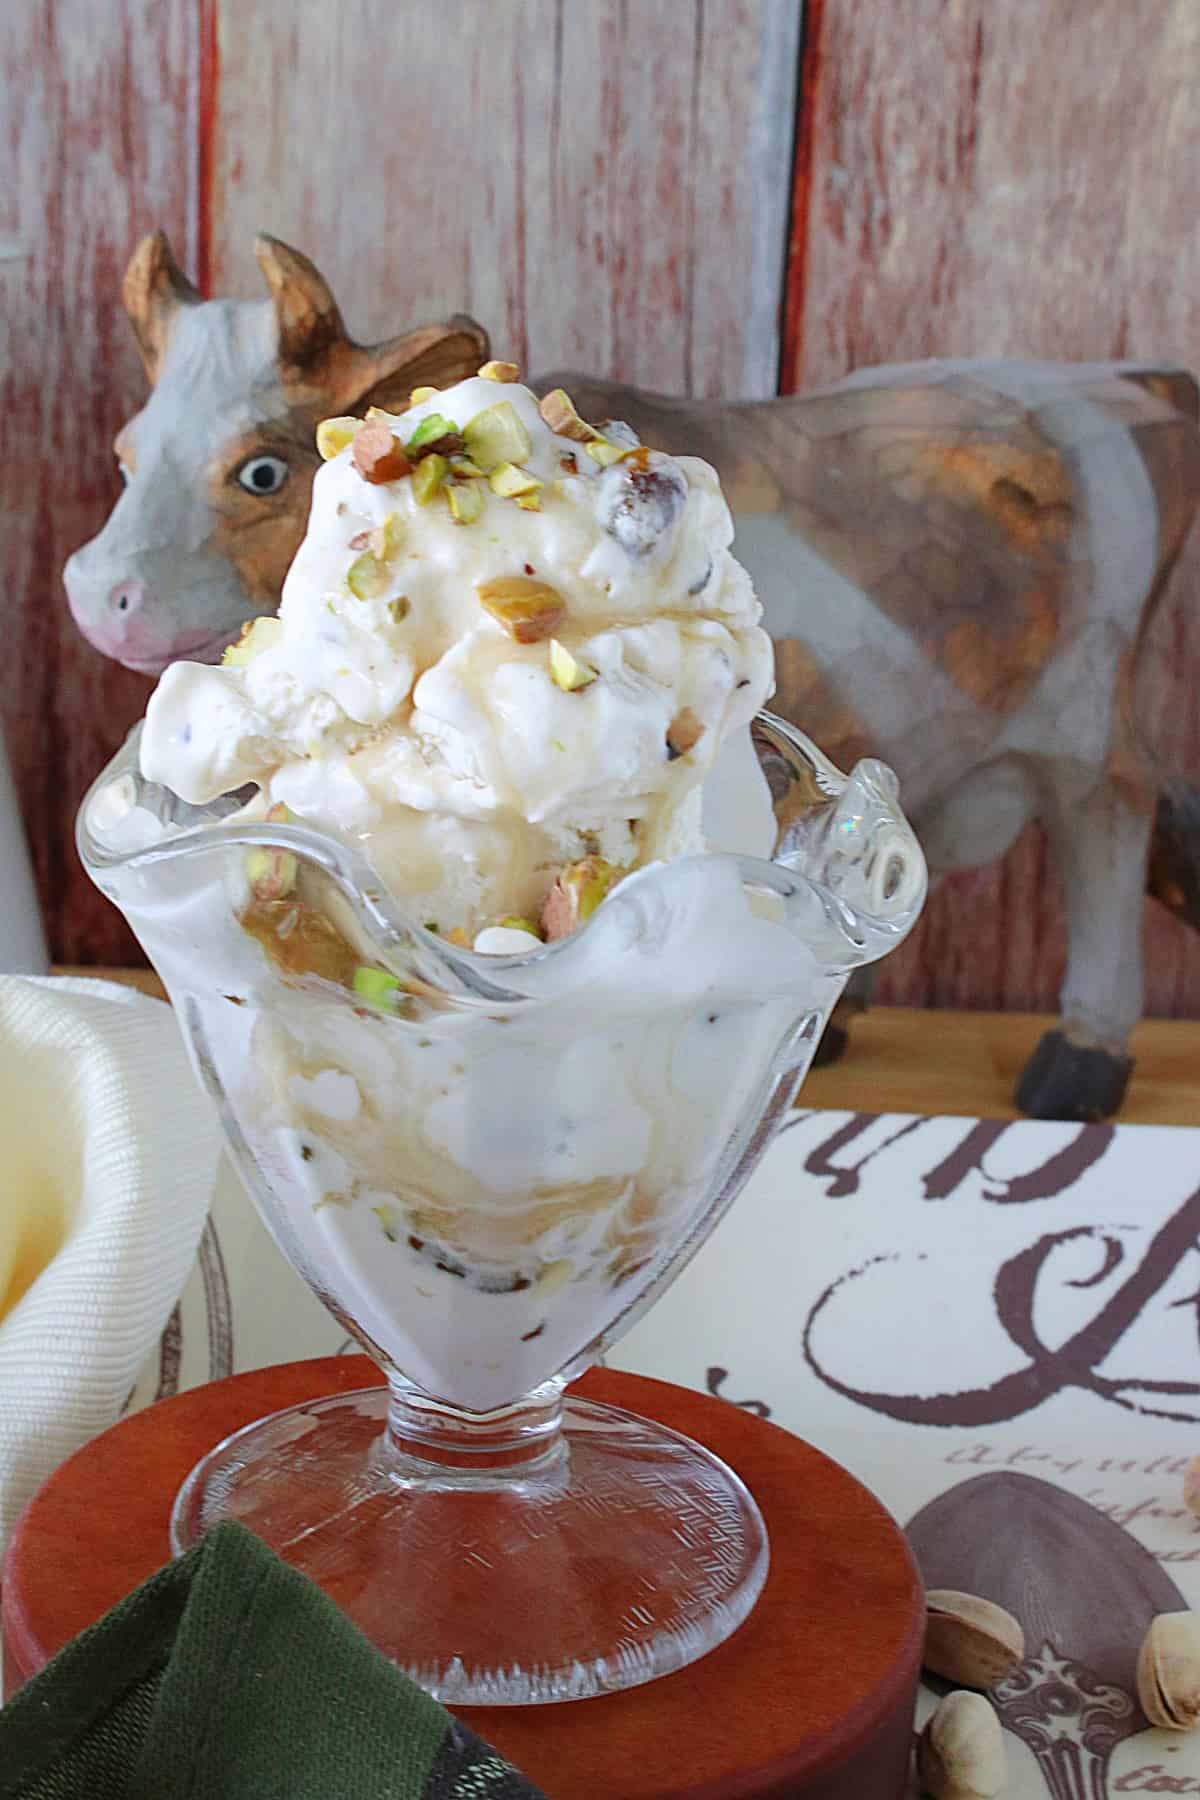 A glass ice cream dish filled with Maple Pistachio Ice Cream in the forefront with a cow in the background.